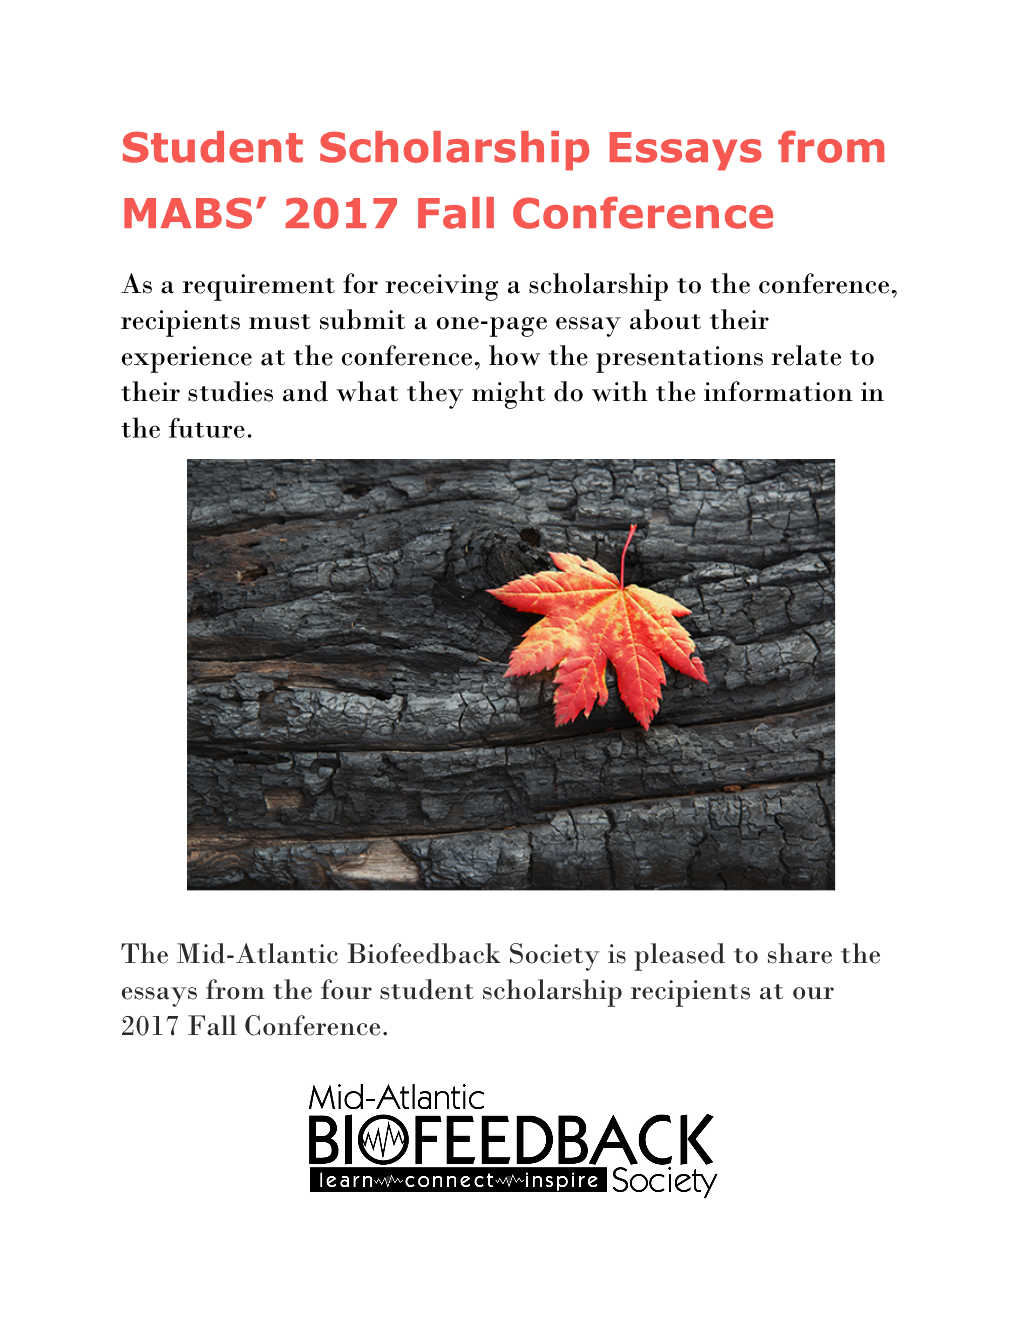 Student Scholarship Essays from MABS' 2017 Fall Conference